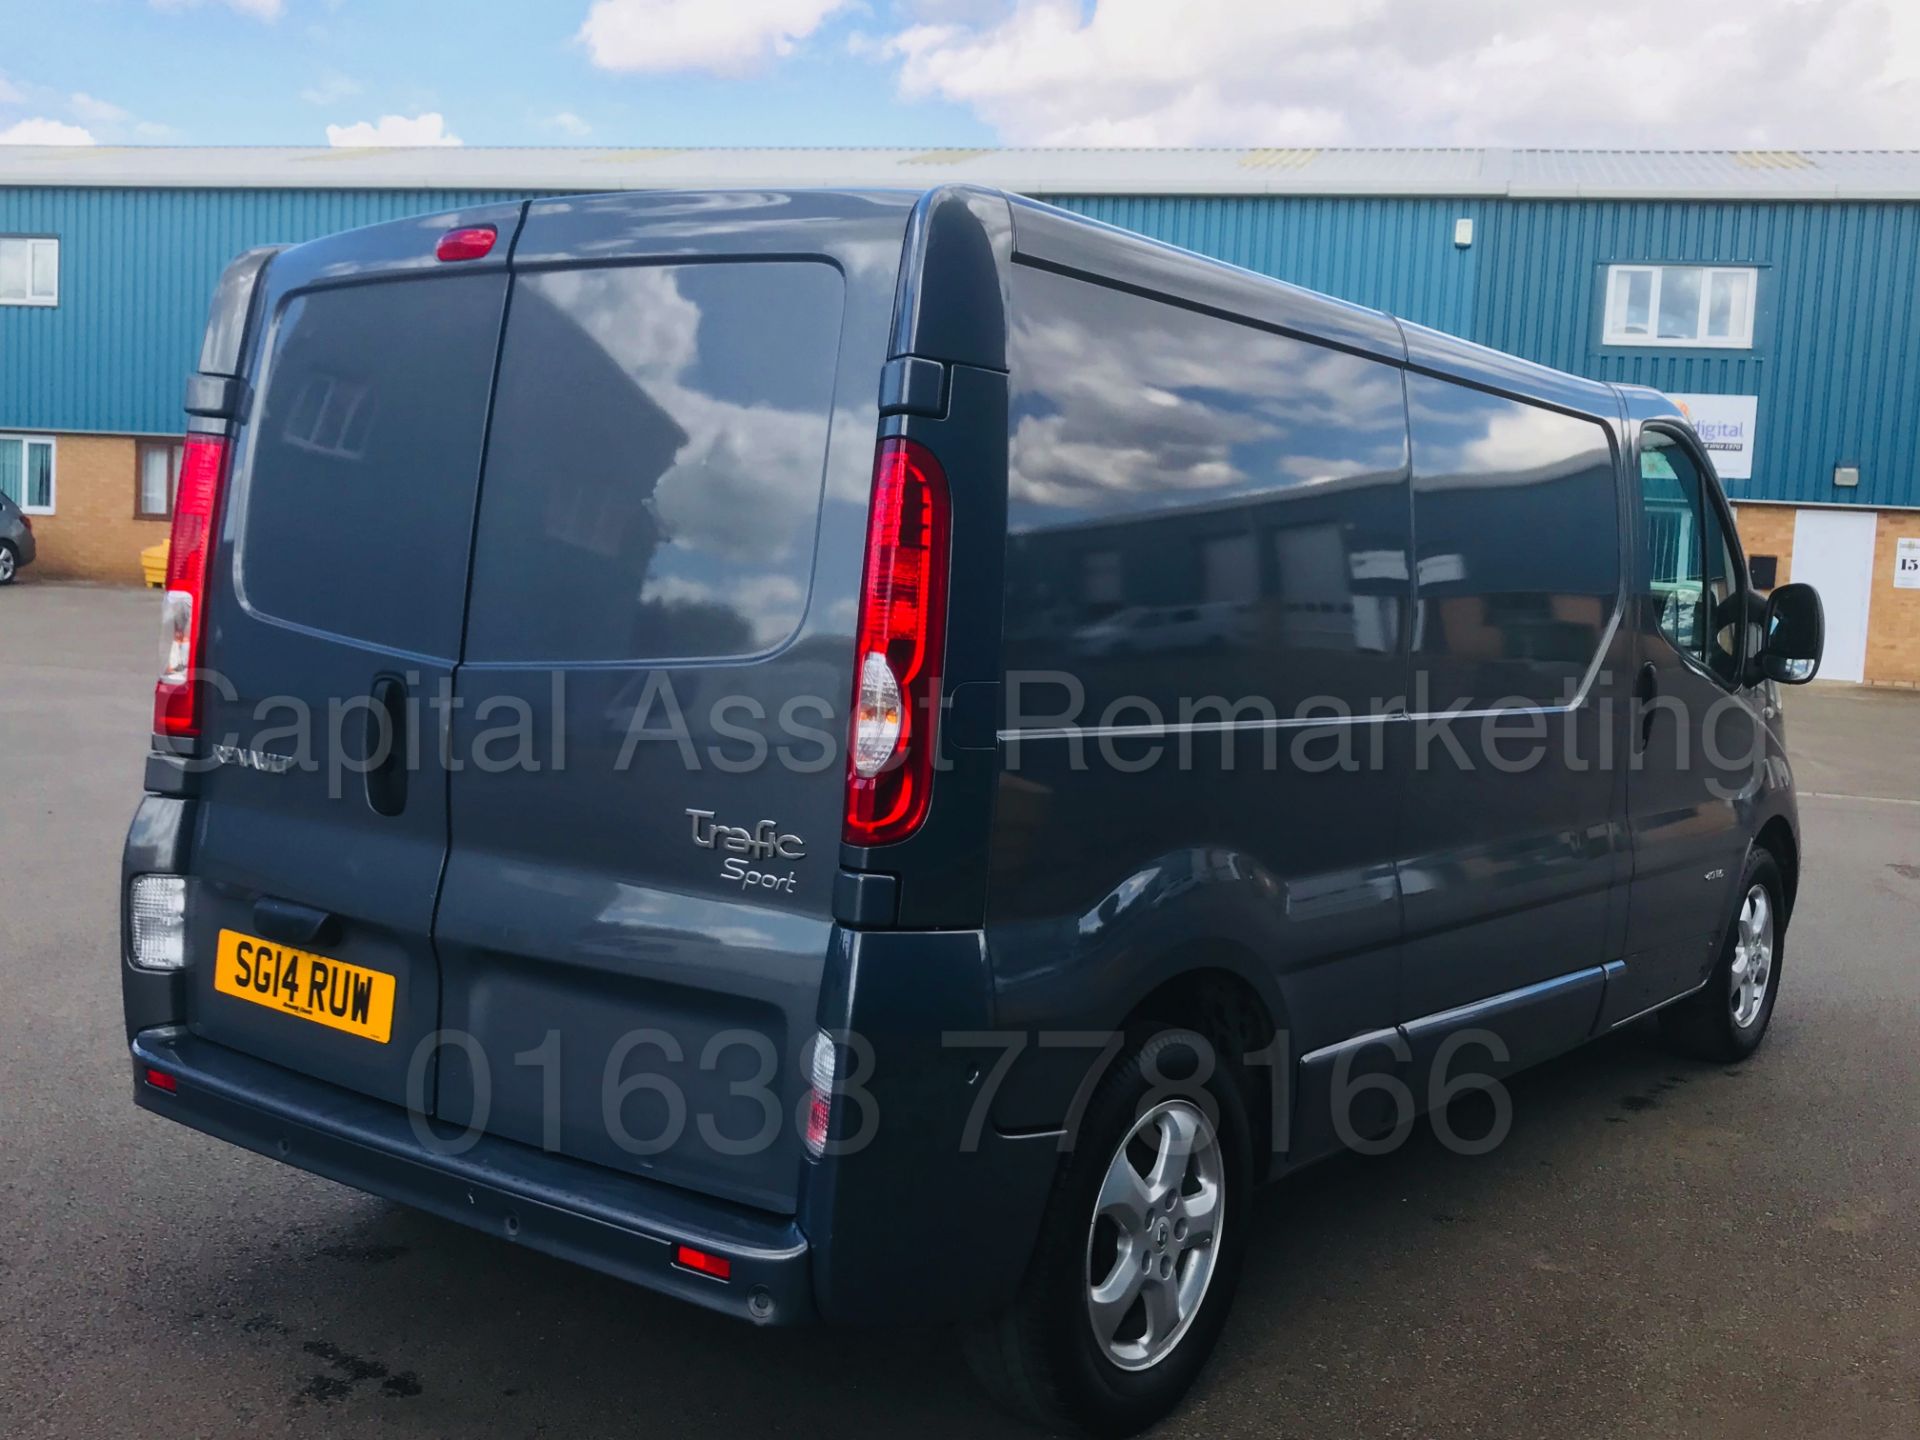 (On Sale) RENAULT TRAFIC 'SPORT EDITION' LWB (2014) '2.0 DCI - 115 BHP - 6 SPEED' *AIR CON* (NO VAT) - Image 7 of 40